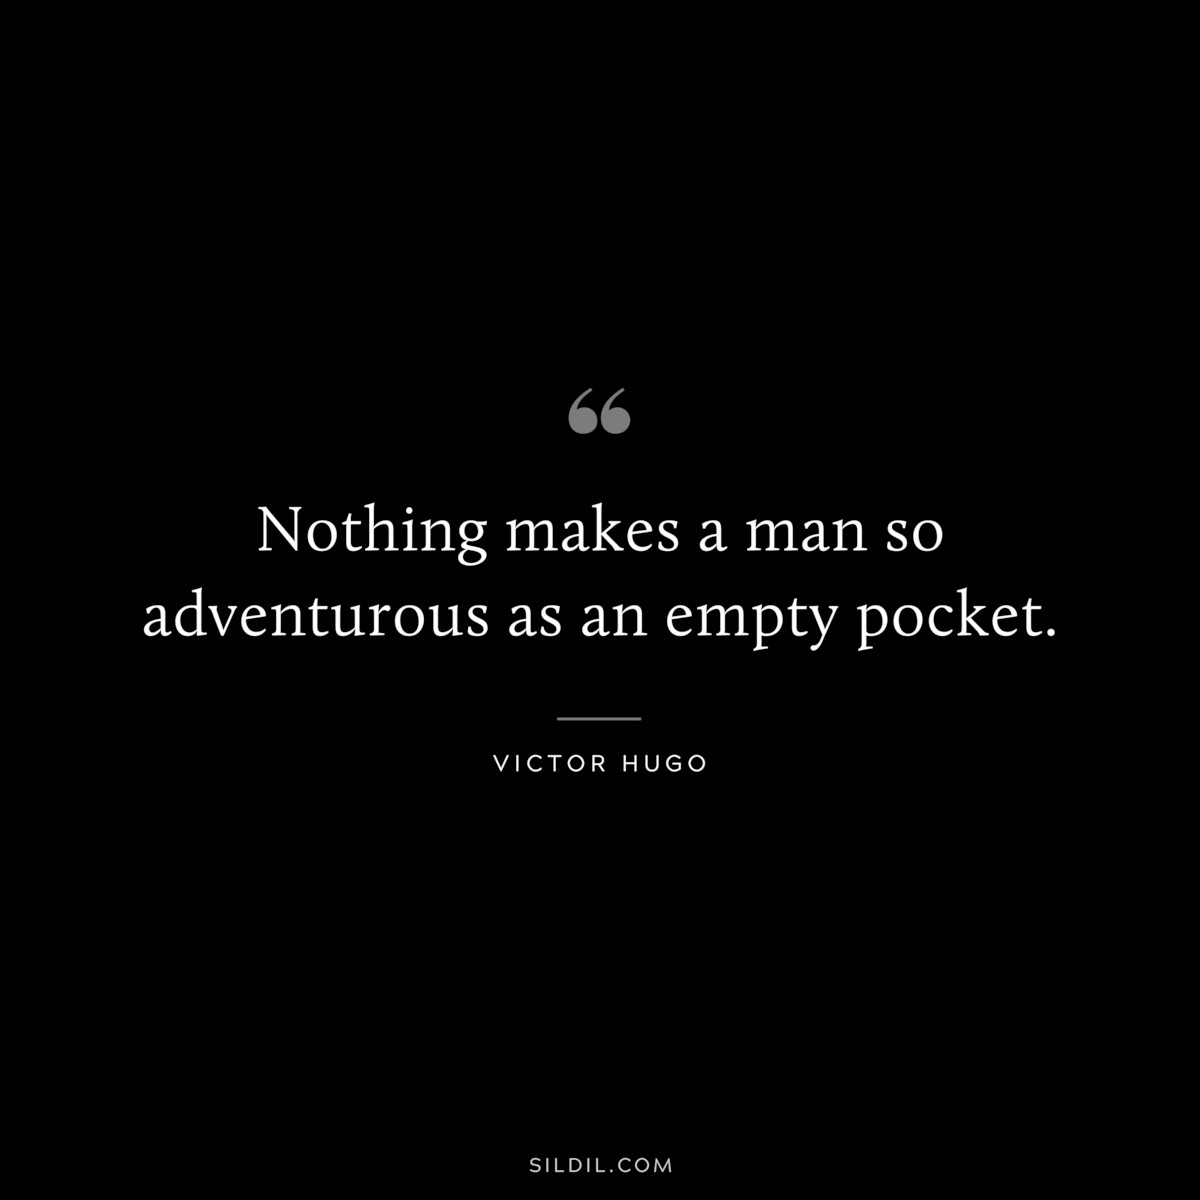 Nothing makes a man so adventurous as an empty pocket.― Victor Hugo